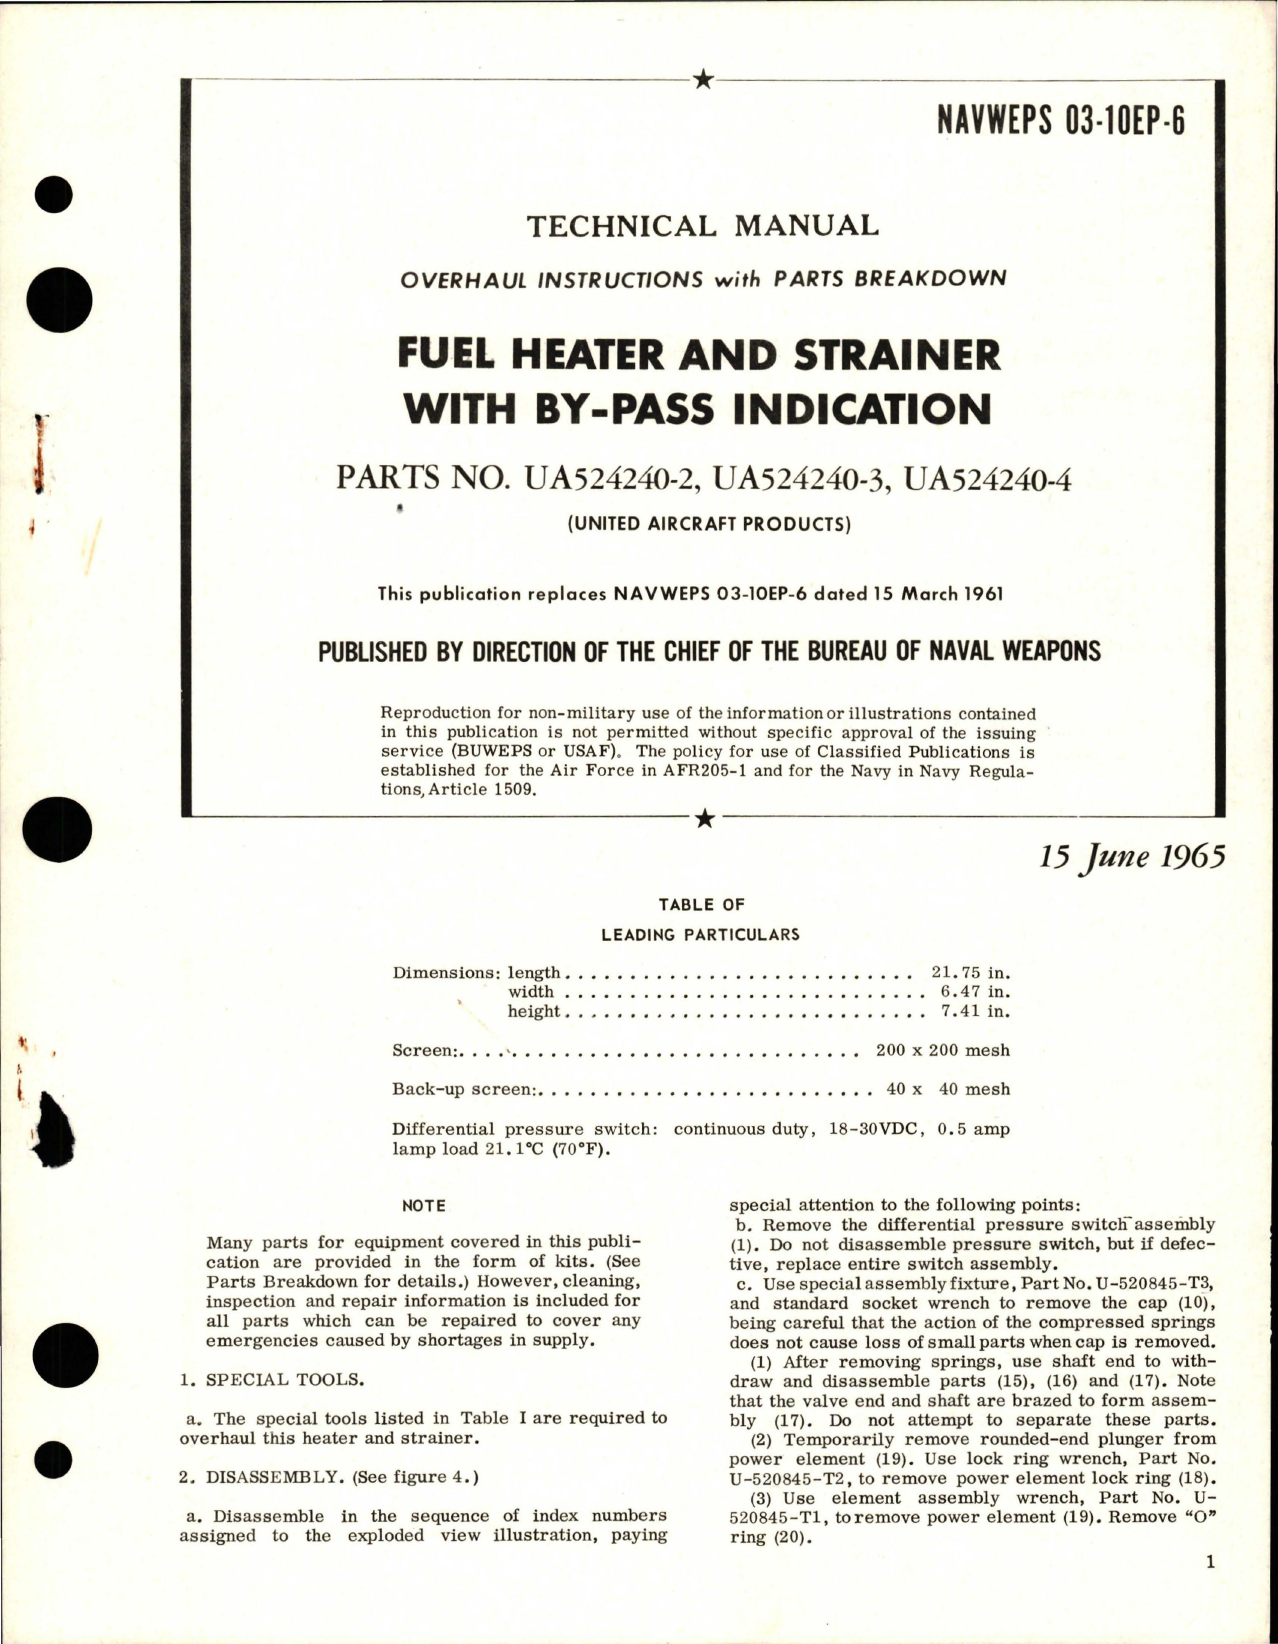 Sample page 1 from AirCorps Library document: Overhaul Instructions with Parts for Fuel Heater and Strainer w By-pass Indication - Parts UA524240-2, UA524240-3, and UA524240-4